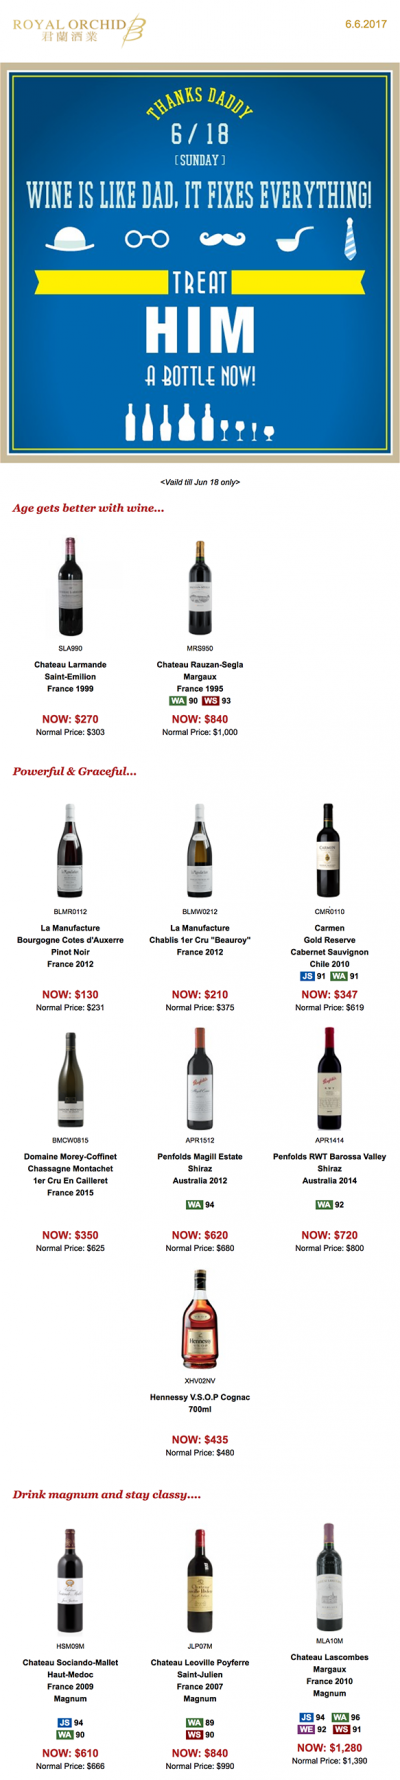 Newsletter by Royal Orchid Wine: Wine is like dad, it fixes everything 